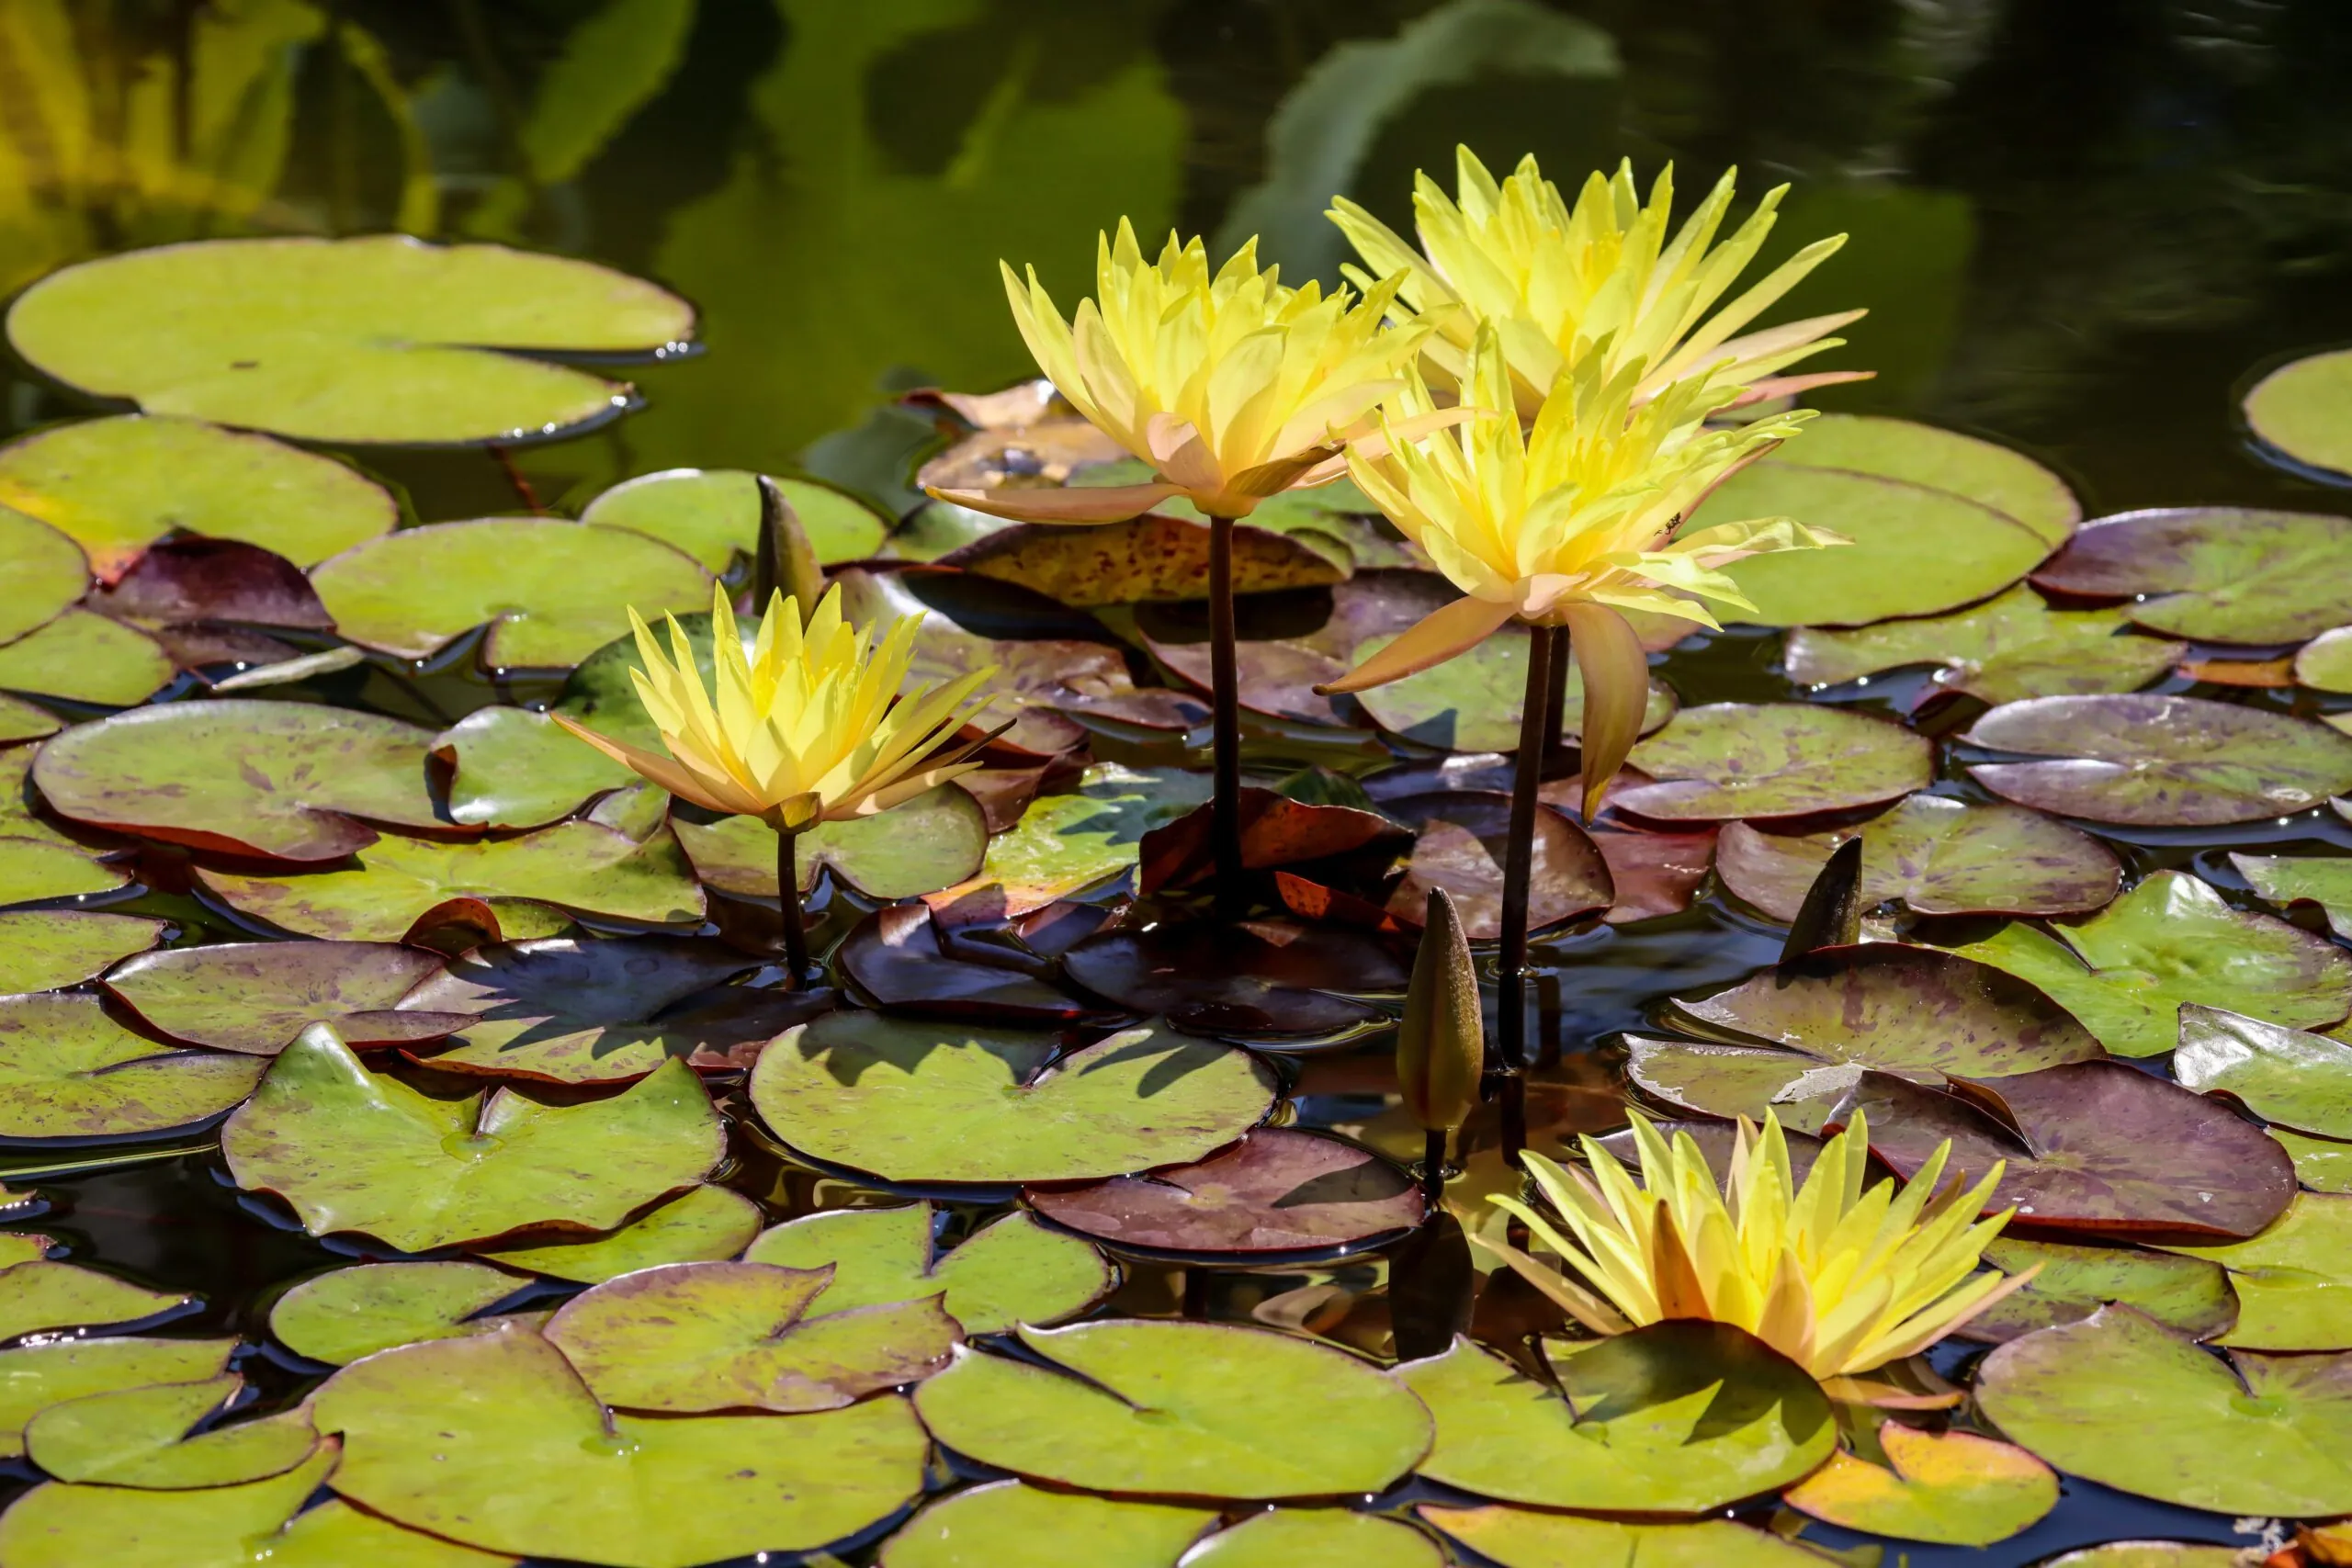 Freshwater pond filled with water lilies. The leaves are bright green and there are five yellow blooms visible.